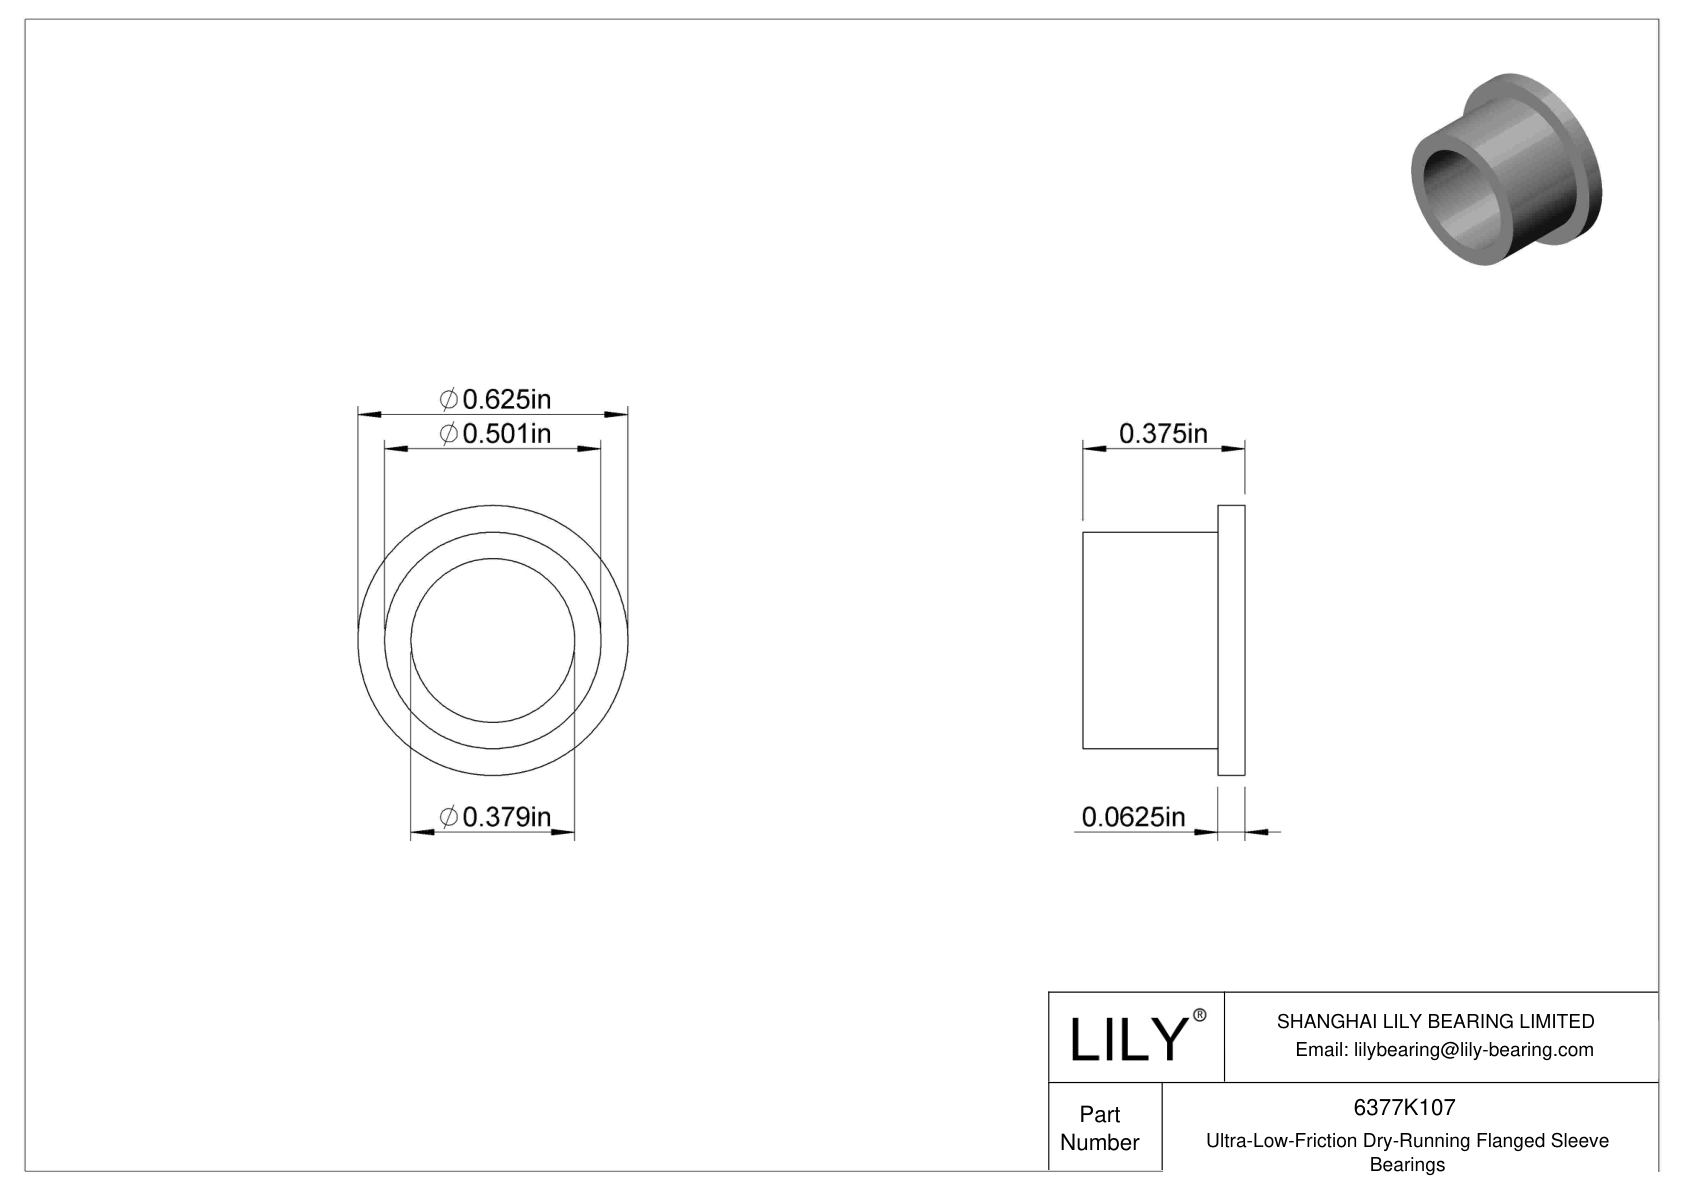 GDHHKBAH Ultra-Low-Friction Dry-Running Flanged Sleeve Bearings cad drawing